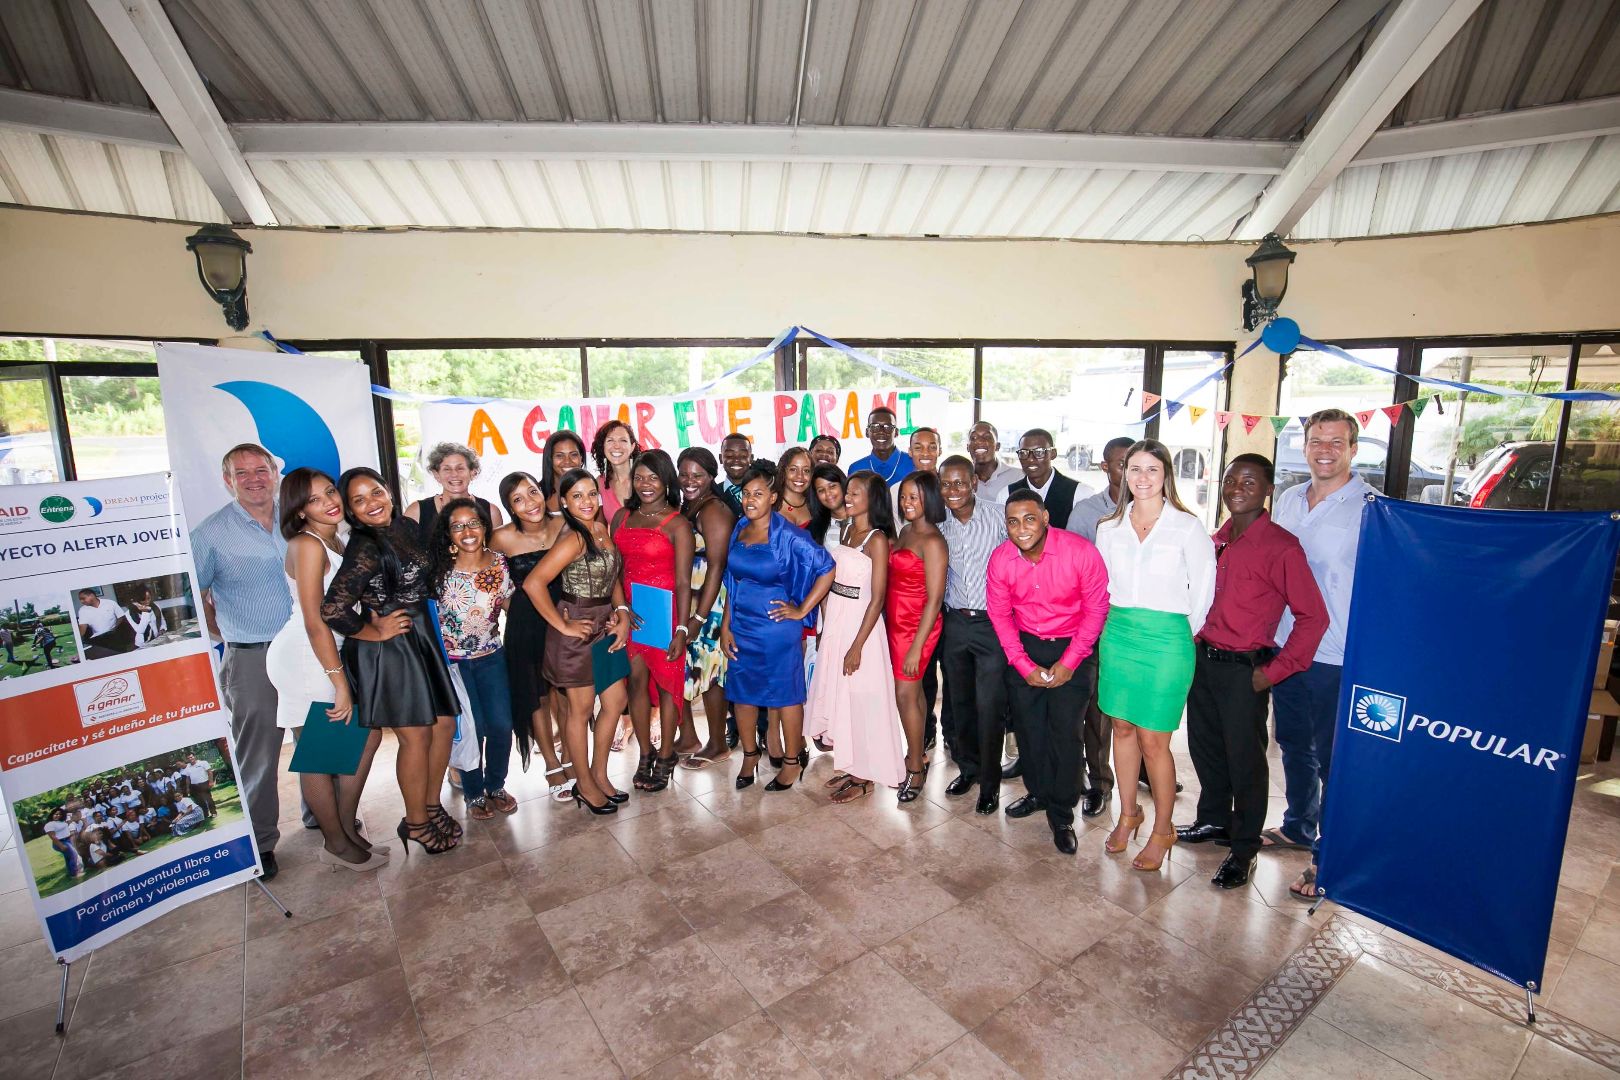 A large group of young leaders with the DREAM Project pose inside a building